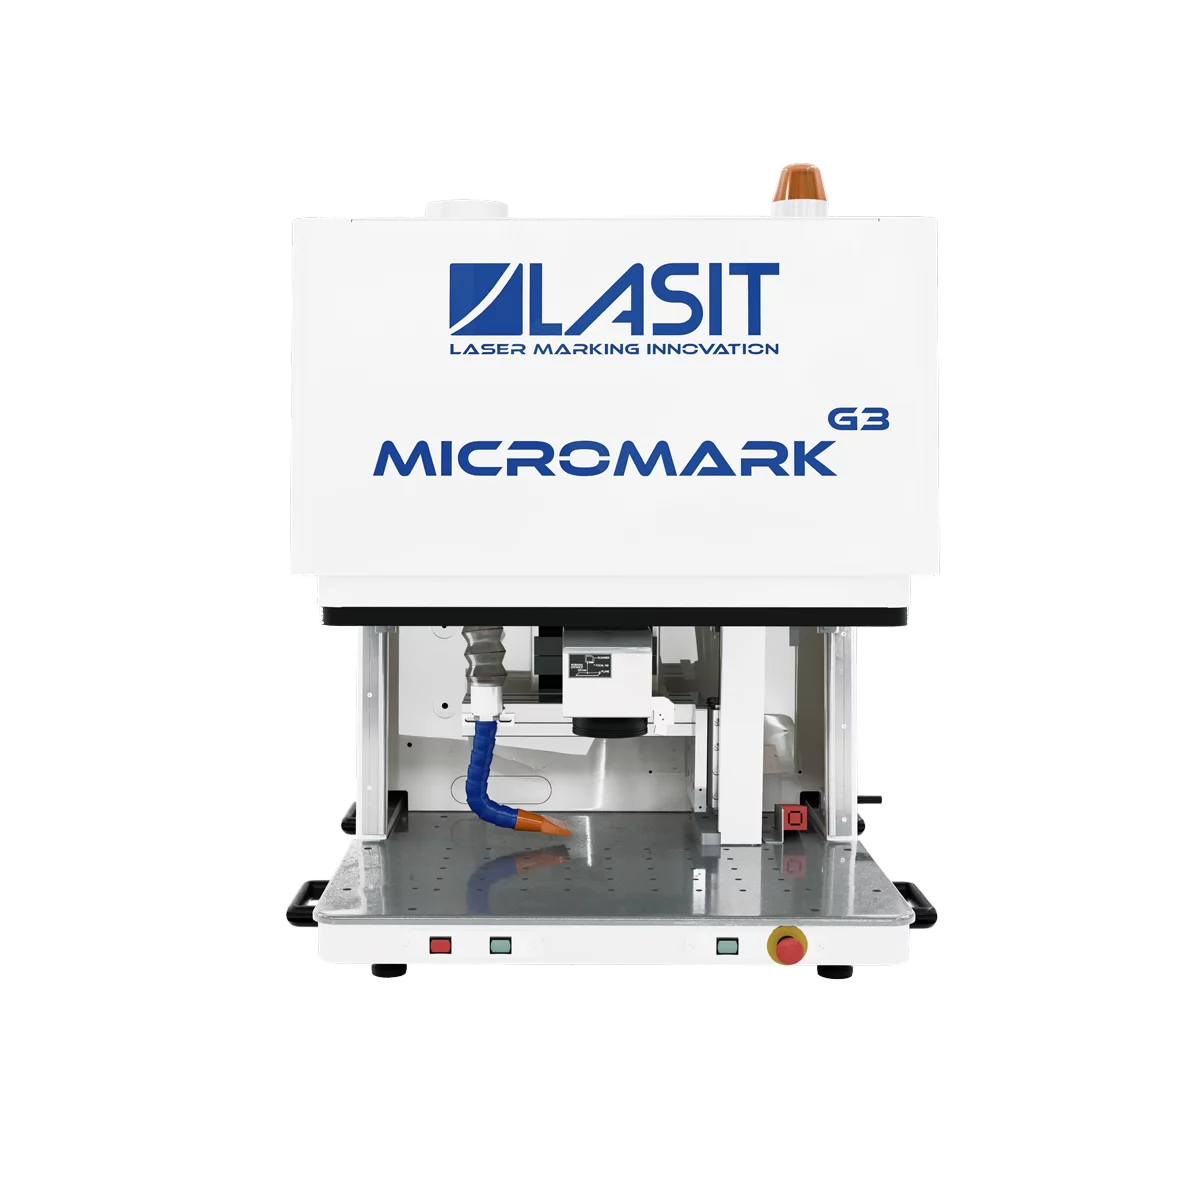 Micromark_web-02 LASIT answers the ten most common questions on laser marking